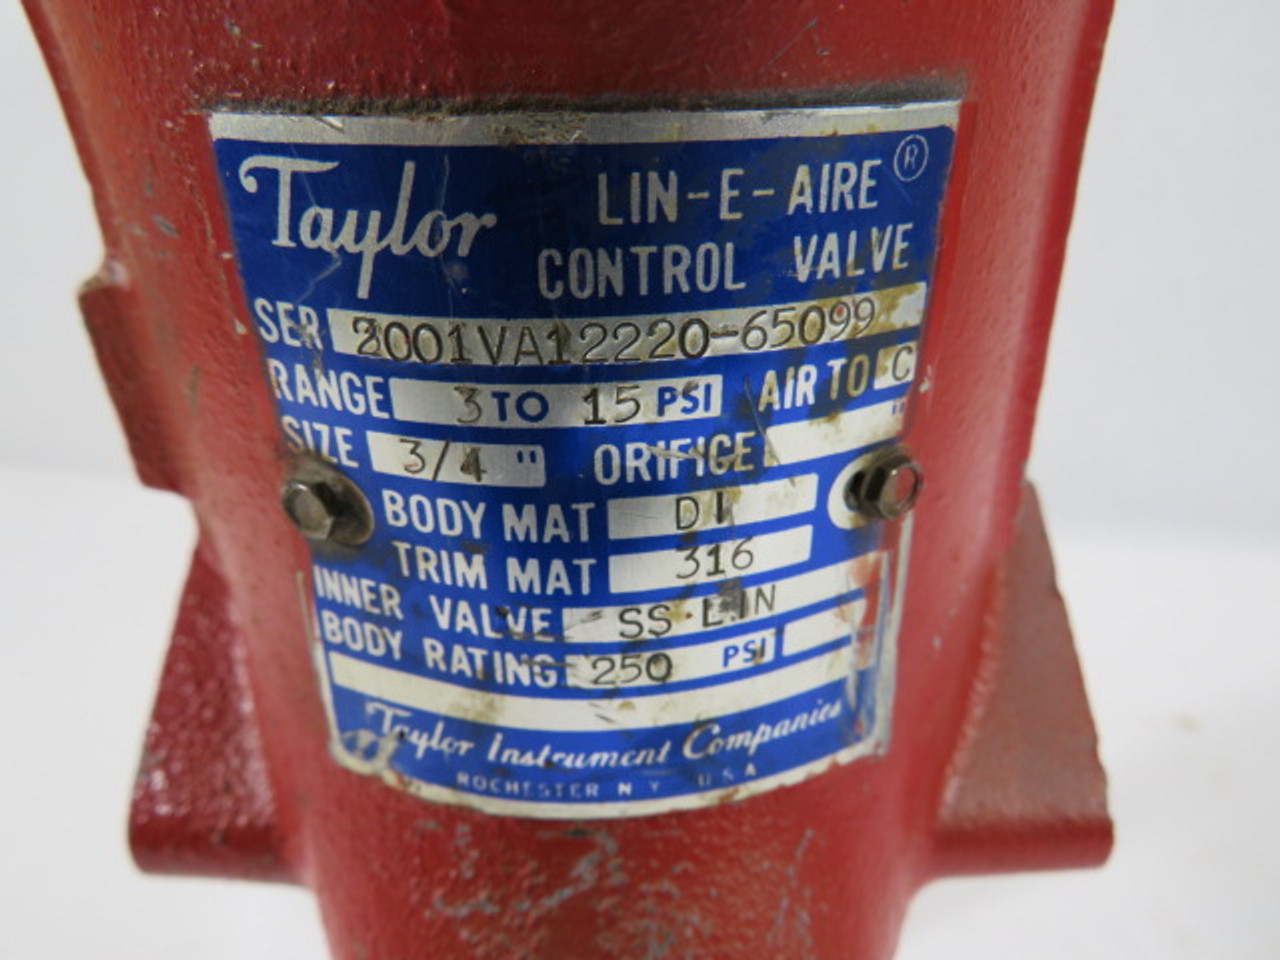 Taylor 3/4" Lin-E-Aire Hi-Flow Iron Control Valve 3/4" 3-15PSIG USED